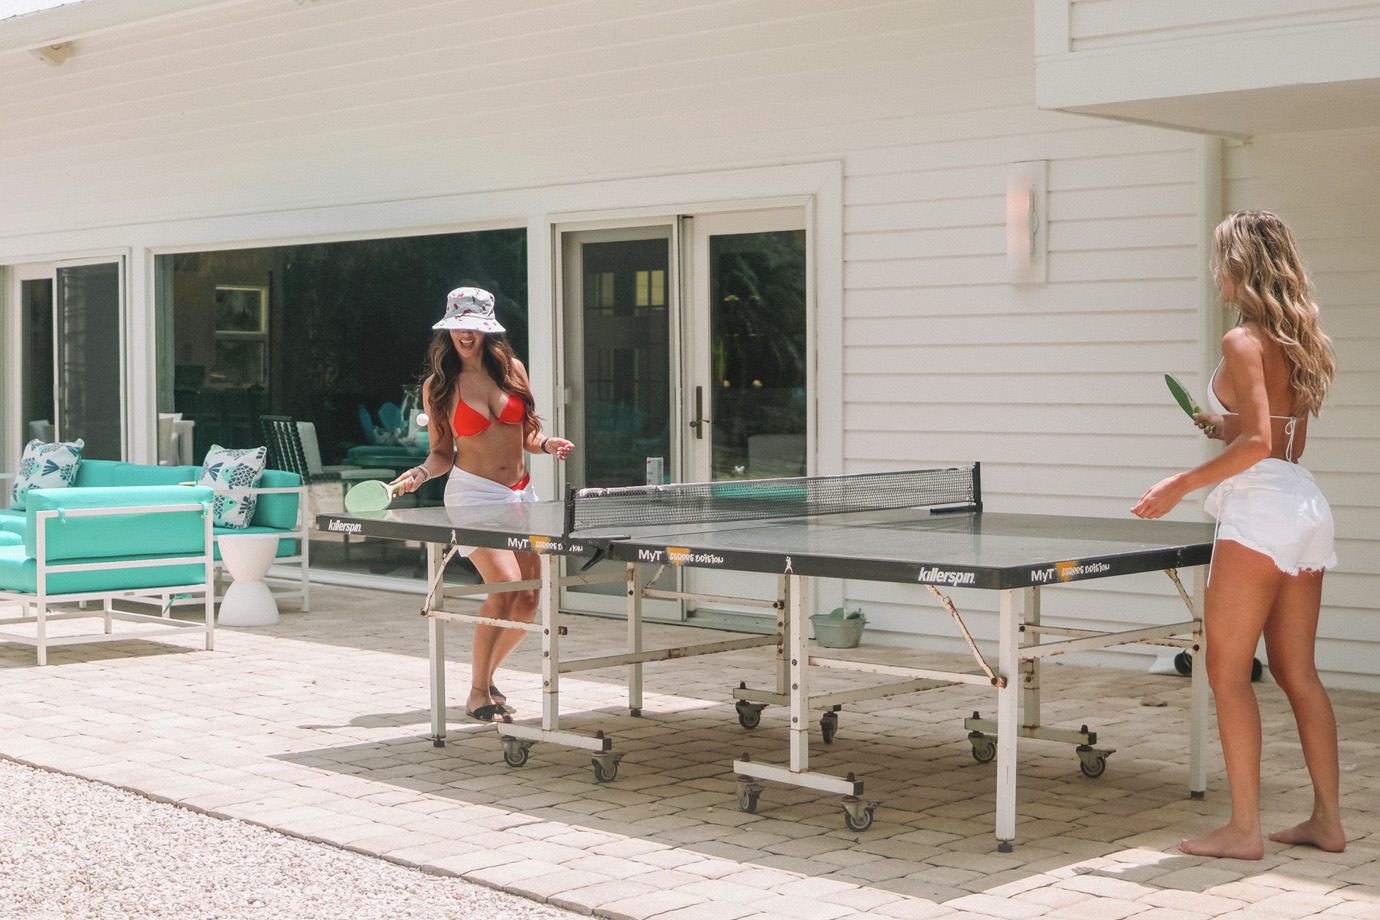 Two women in bathing suits and white shorts playing ping pong outdoors near teal patio furniture at the Sea Oats Estate in Captiva Island, FL